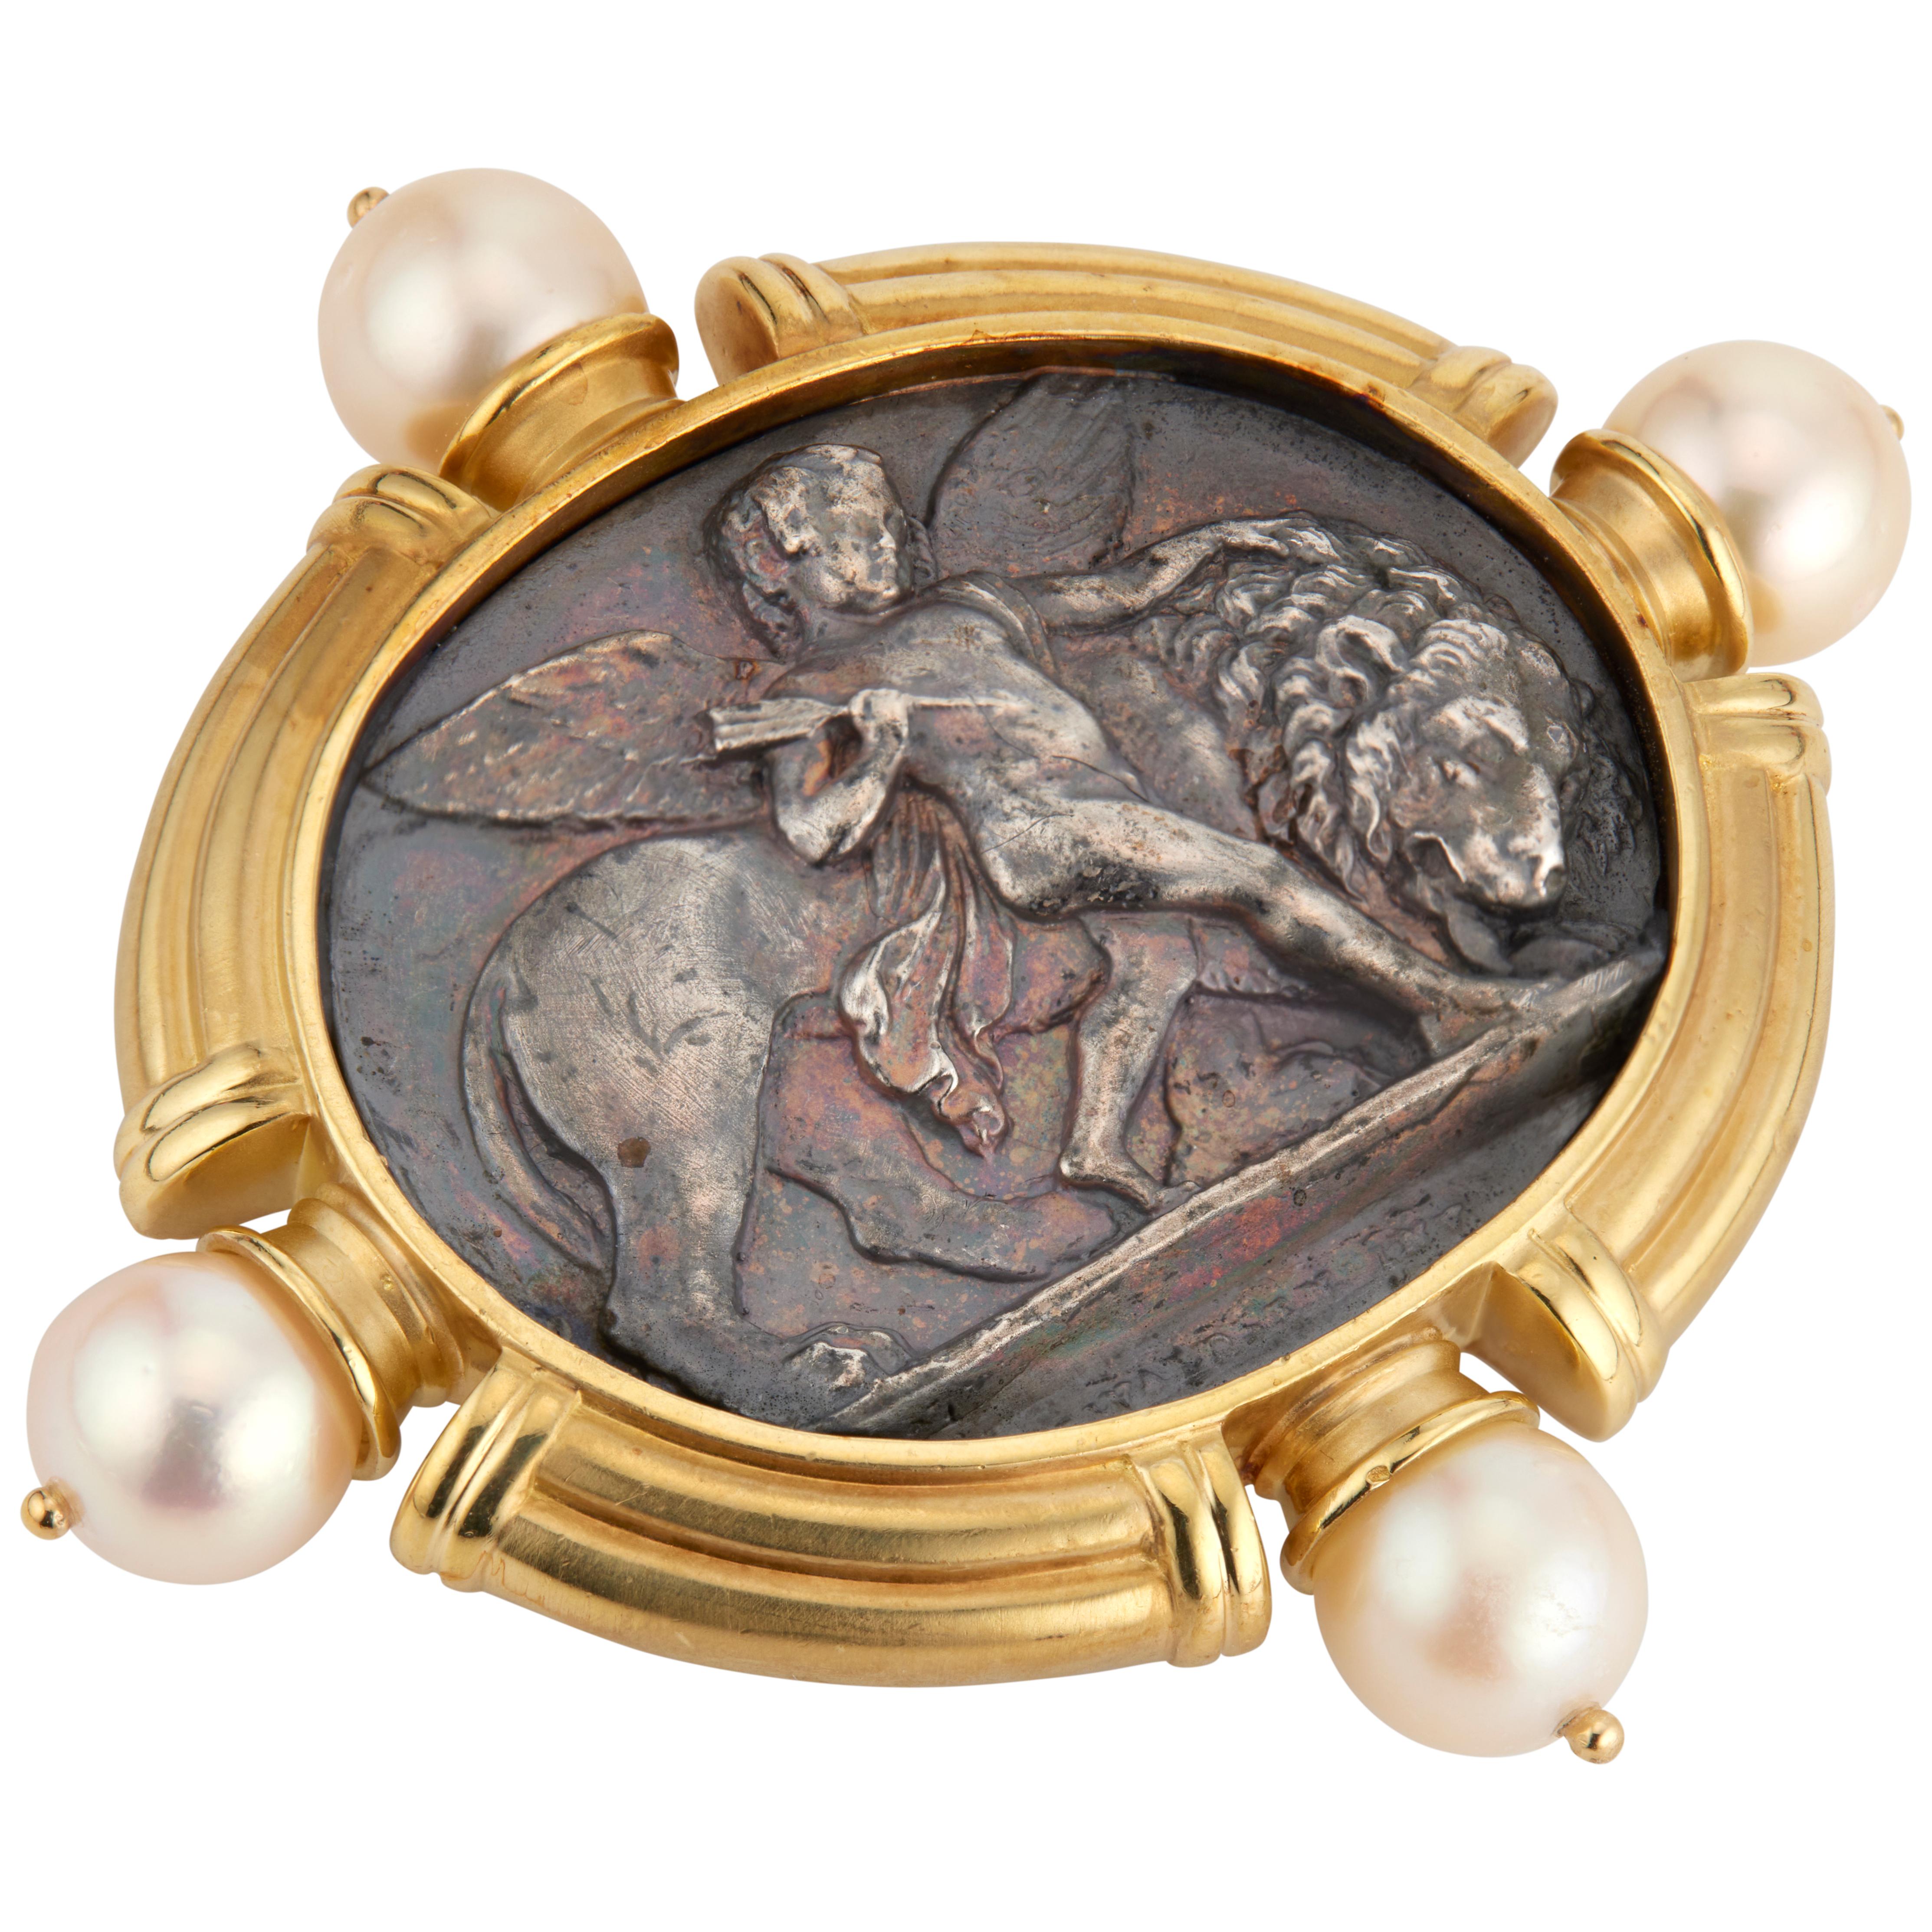 18k yellow gold and silver SeidenGang brooch. 3-D hand crafted silver angel and lion design, with four 9mm South Sea round pearls. 

4 cultured crème/rose color pearls, 9.0mm-9.4mm
18k yellow gold 
Silver 
Stamped: SG 18k
Hallmark: SG